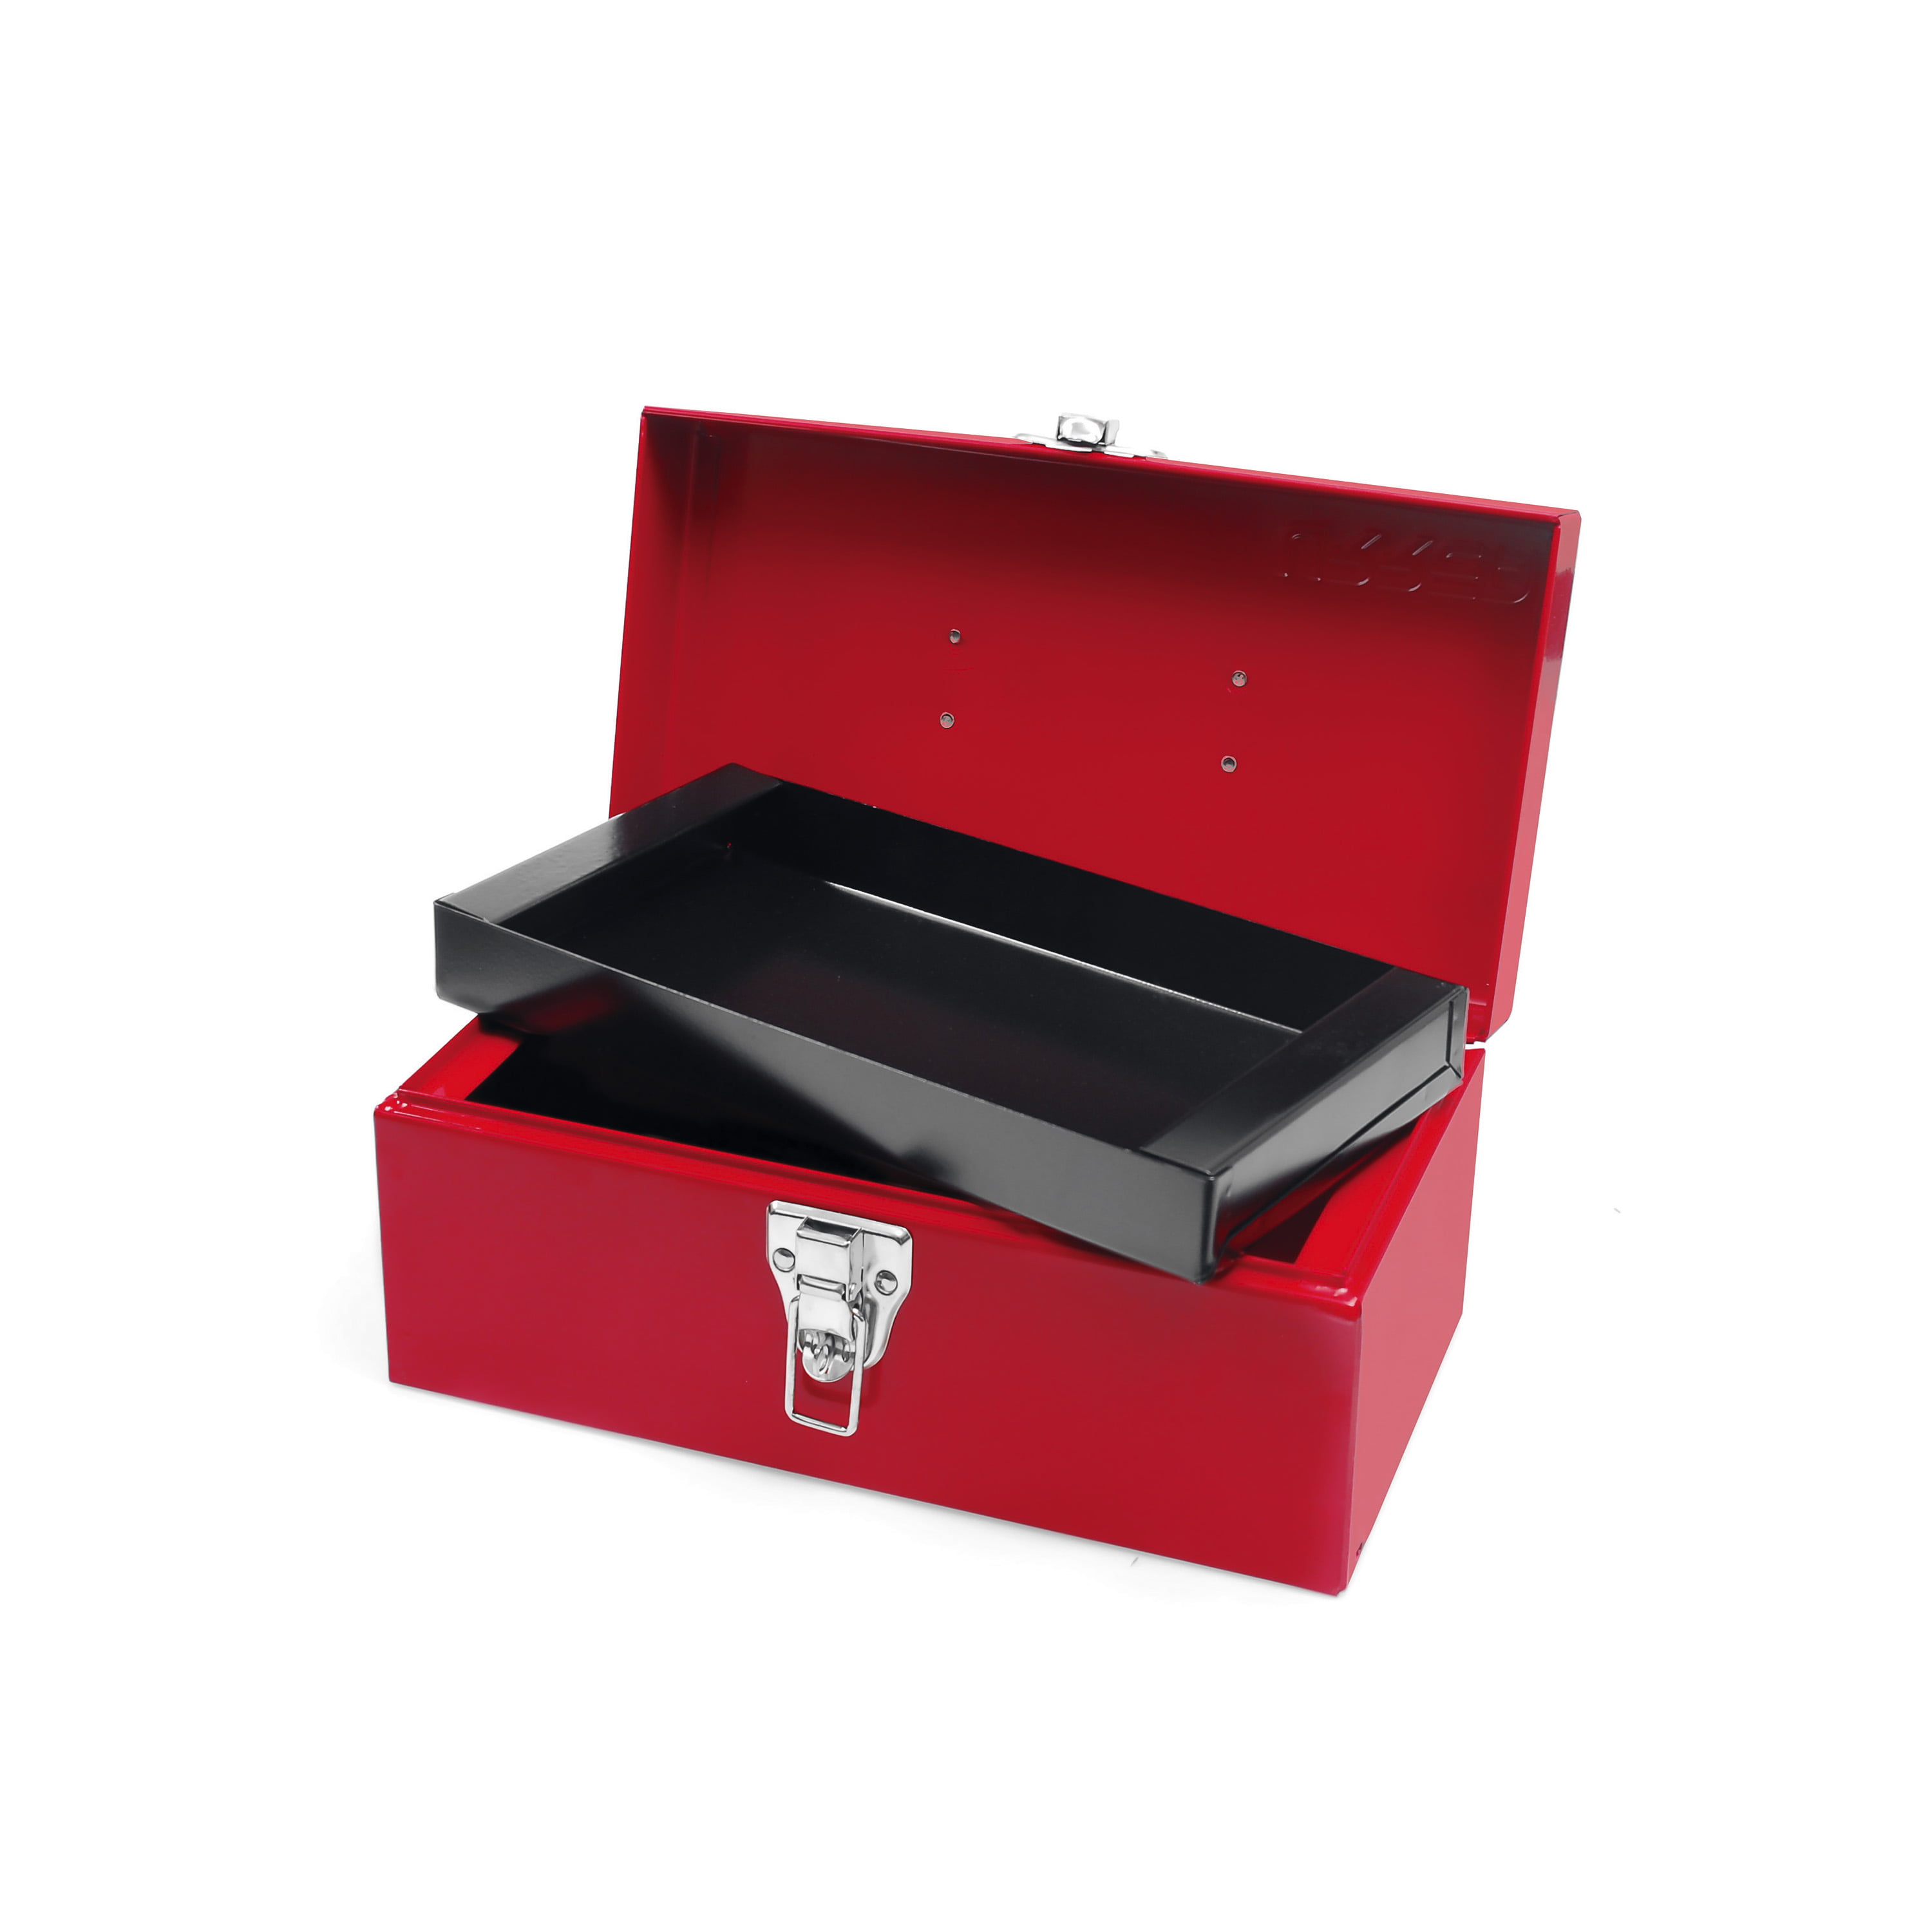 Details about   Metal Tool Box 9.6"x5"x1.4" Portable Storage Organize 24 Gauge Construction Red 